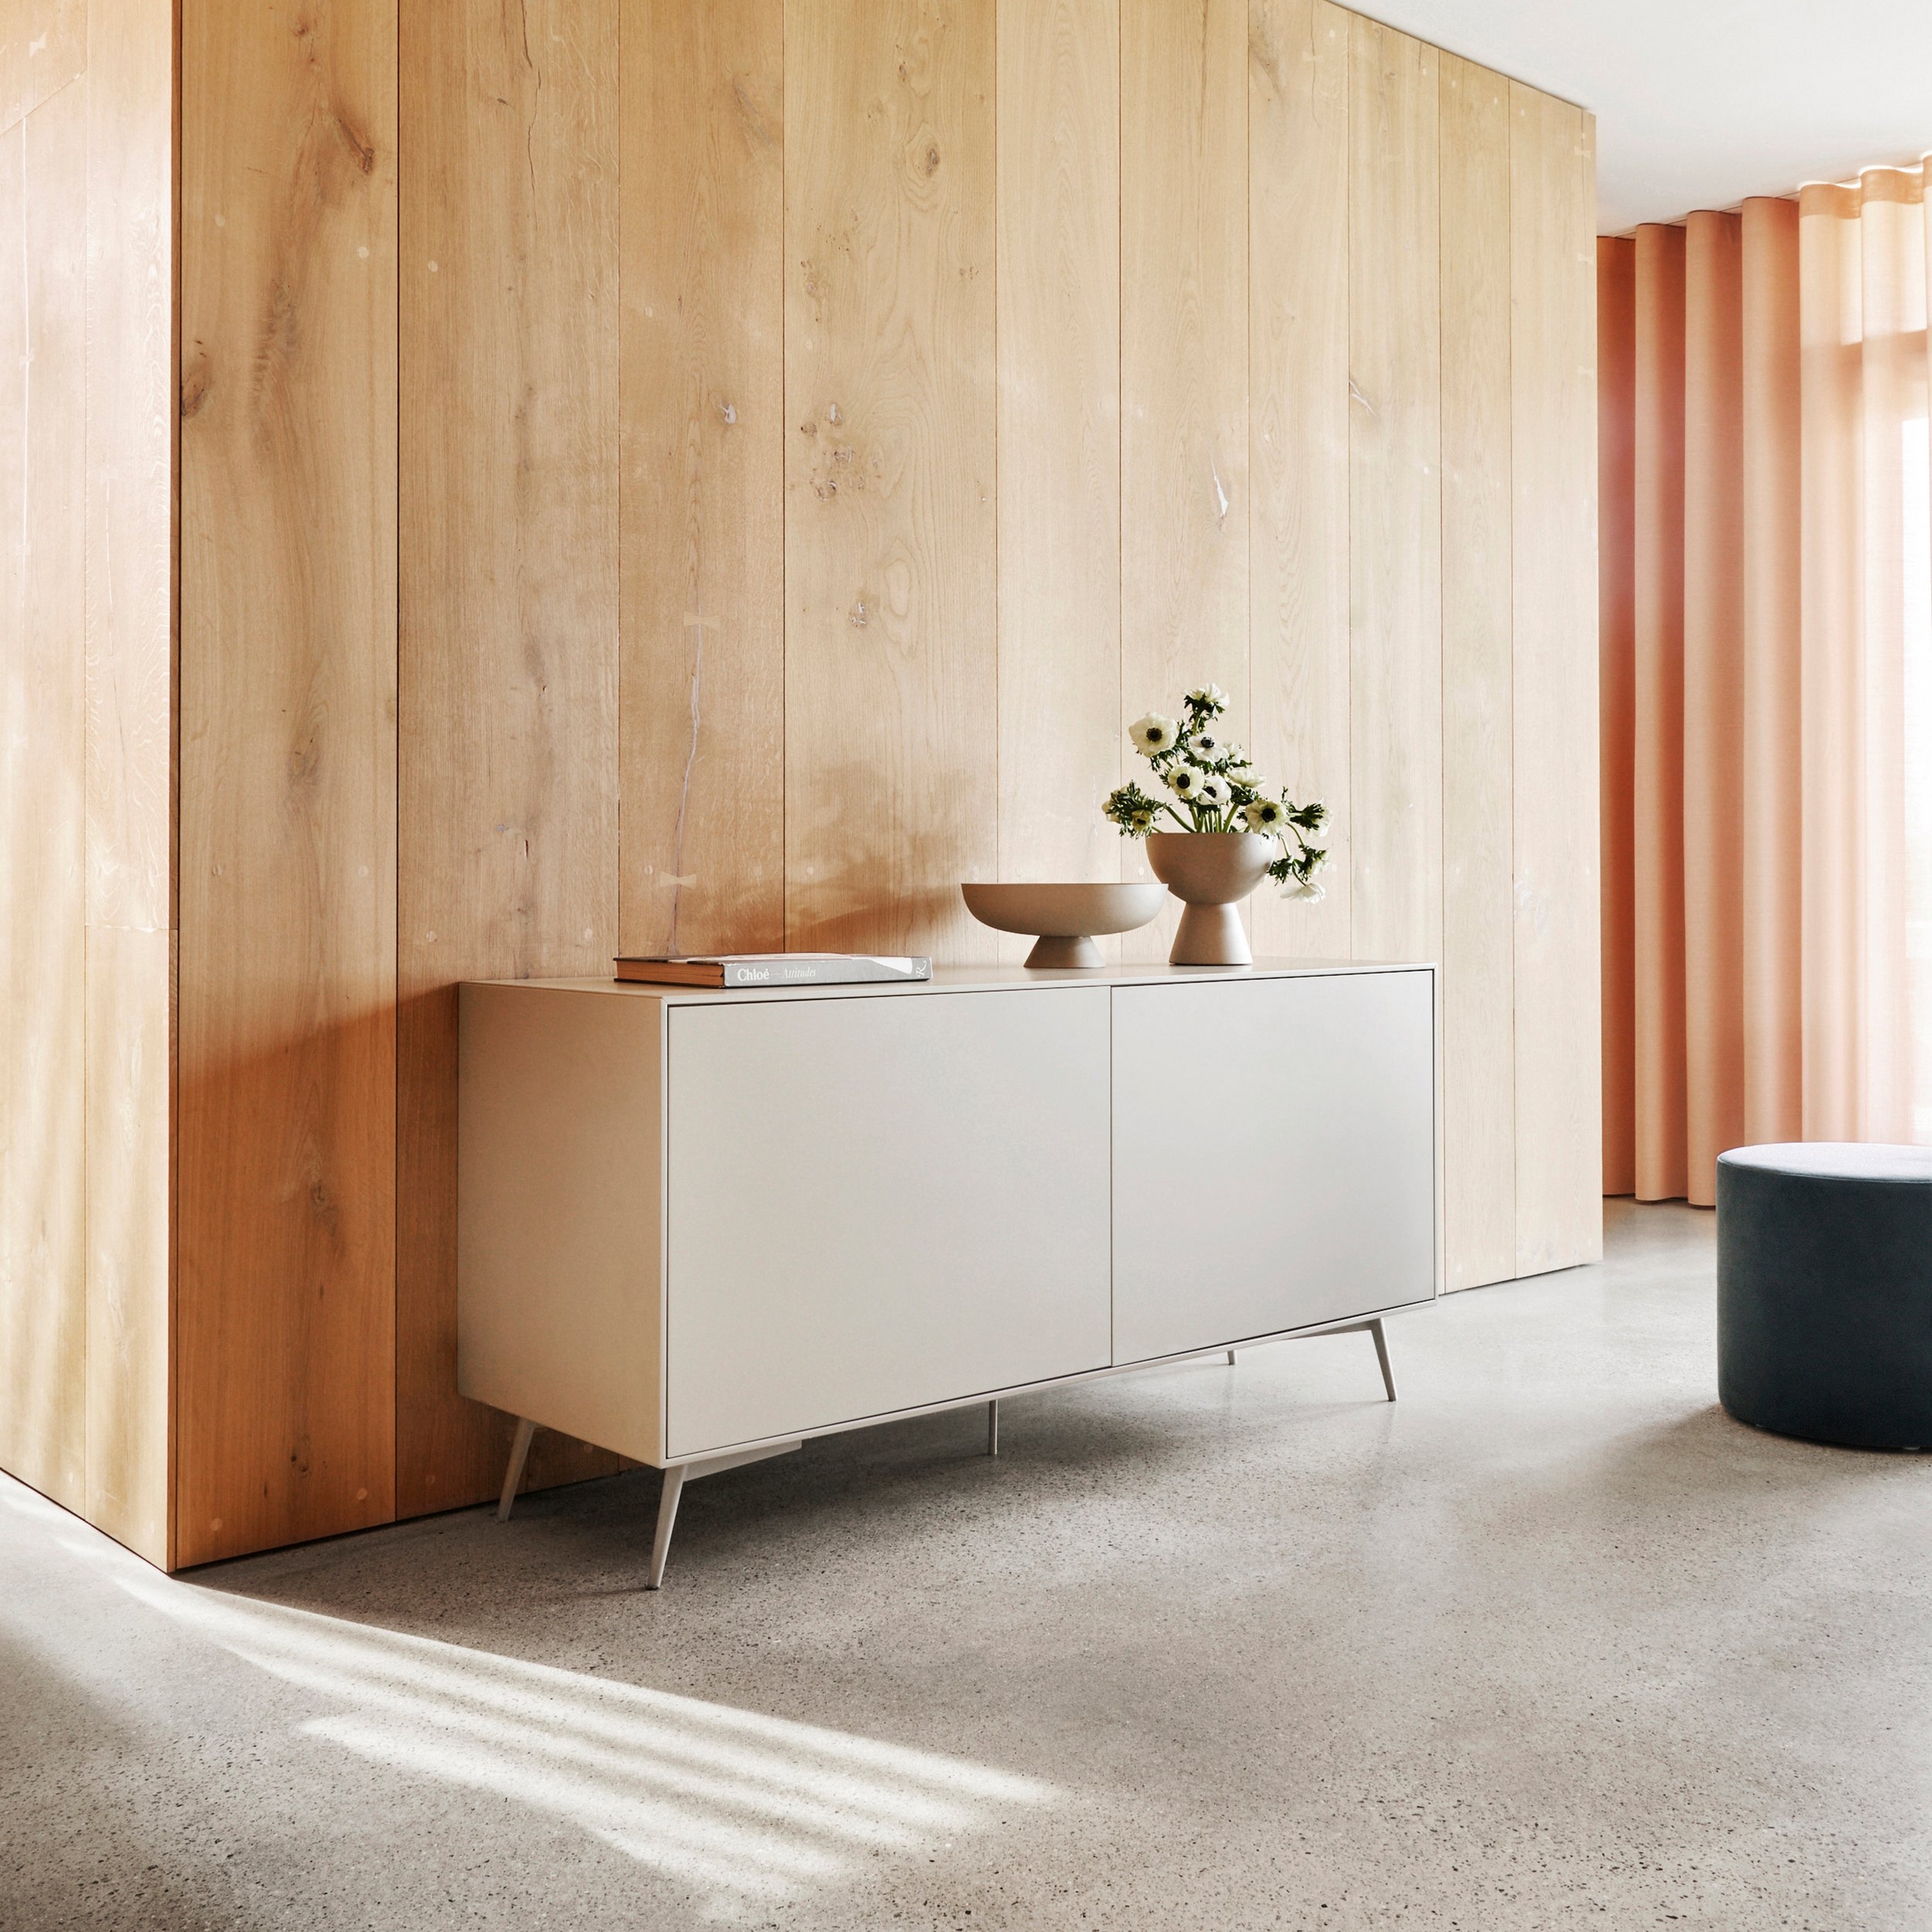 Modern sideboard with decor against a wooden wall, floor-to-ceiling curtains, in a bright room.